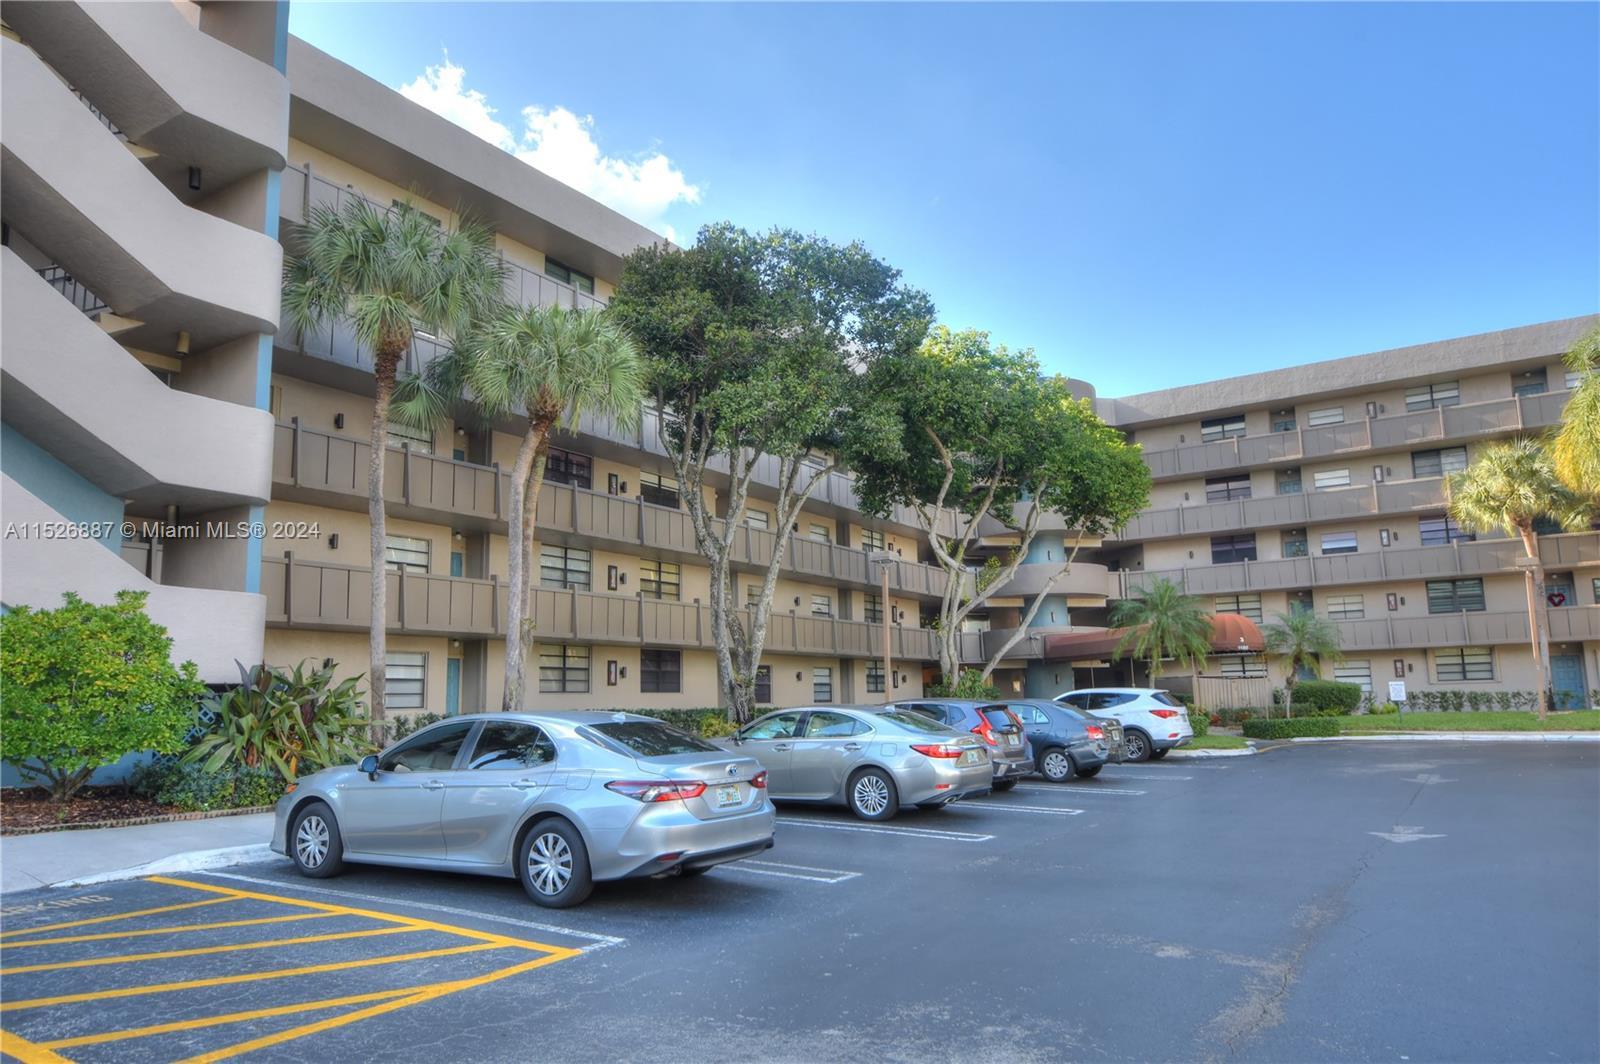 Photo of 1100 Colony Point Cir #503 in Pembroke Pines, FL